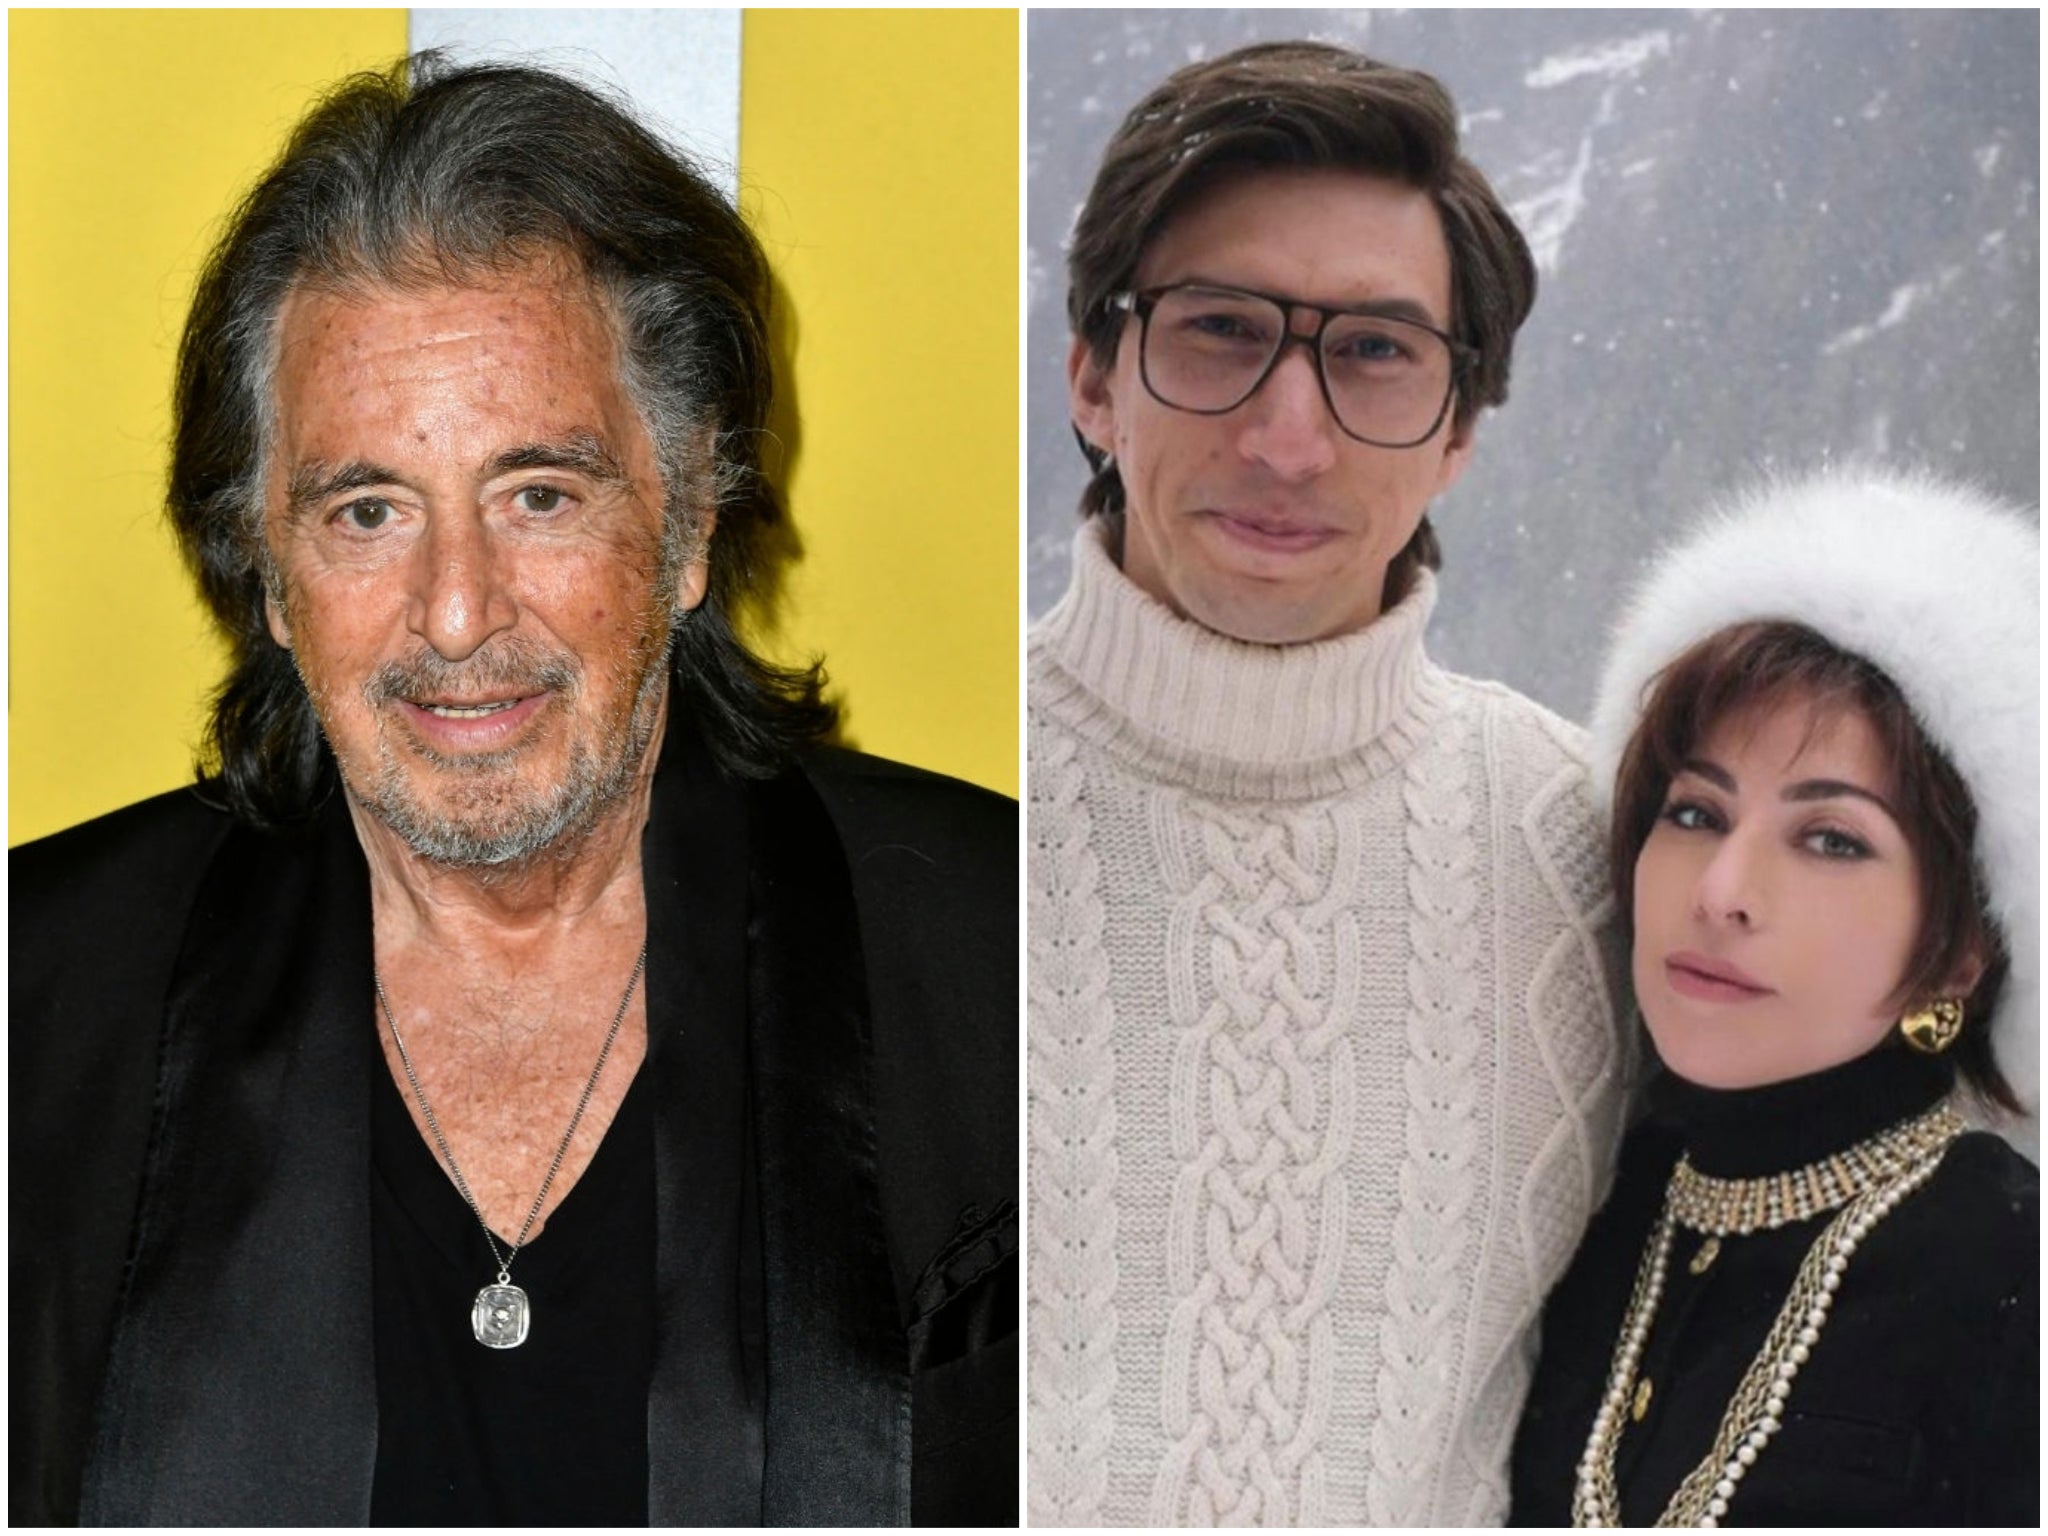 Al Pacino in 2020, and Adam Driver and Lady Gaga in House of Gucci